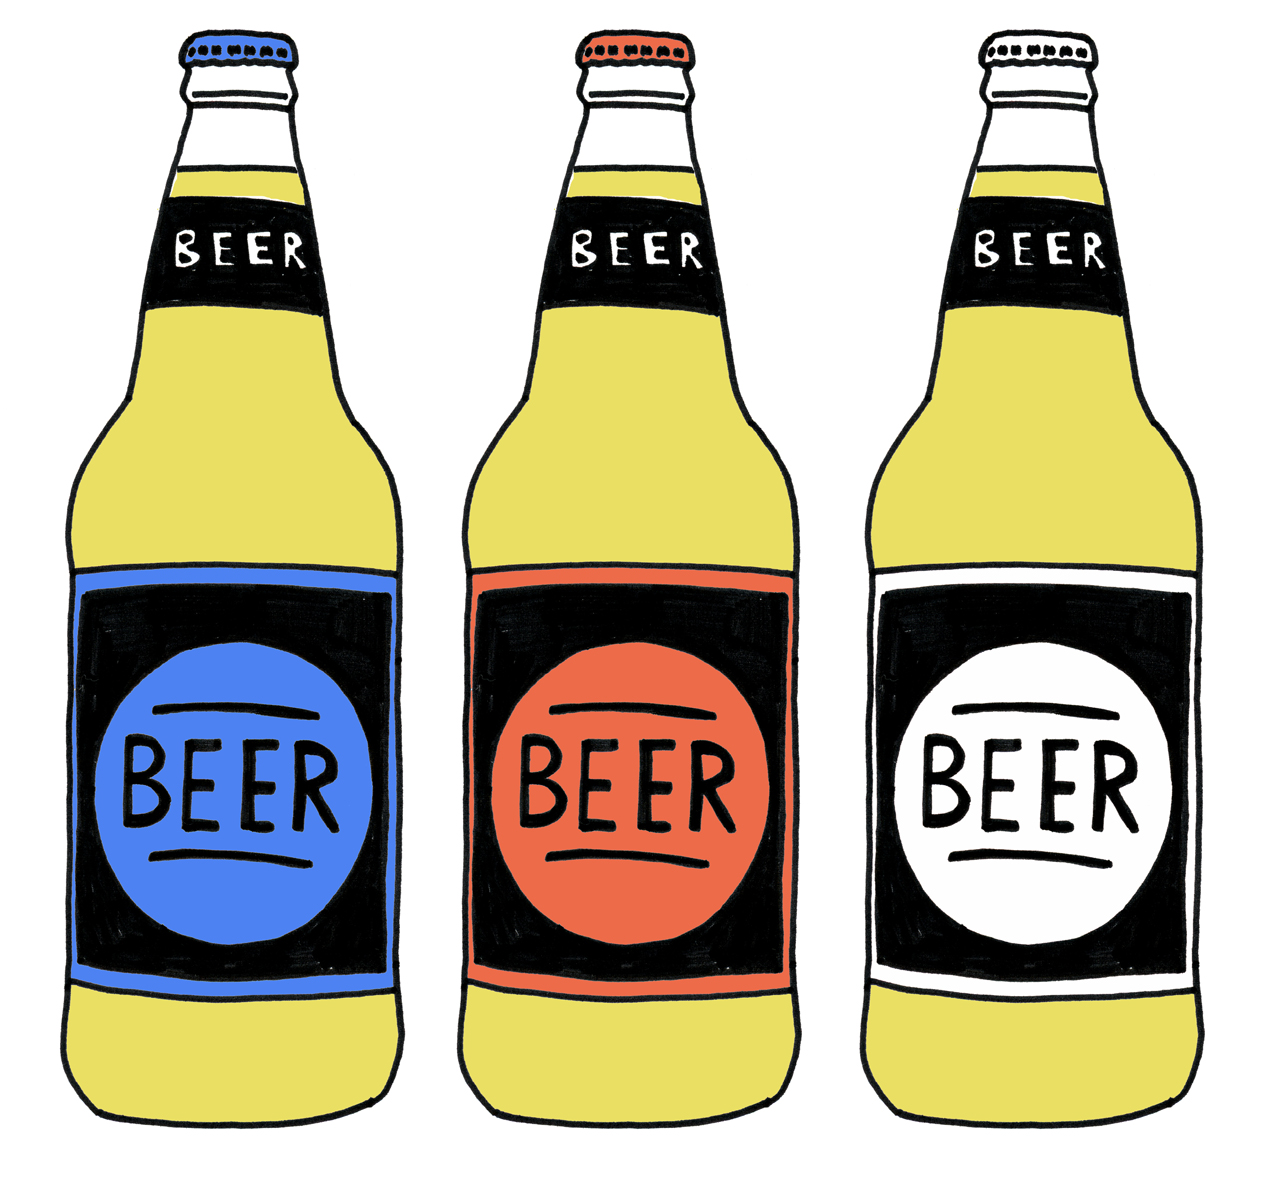 Beer Bottle Clip Art & Beer Bottle Clip Art Clip Art Images.